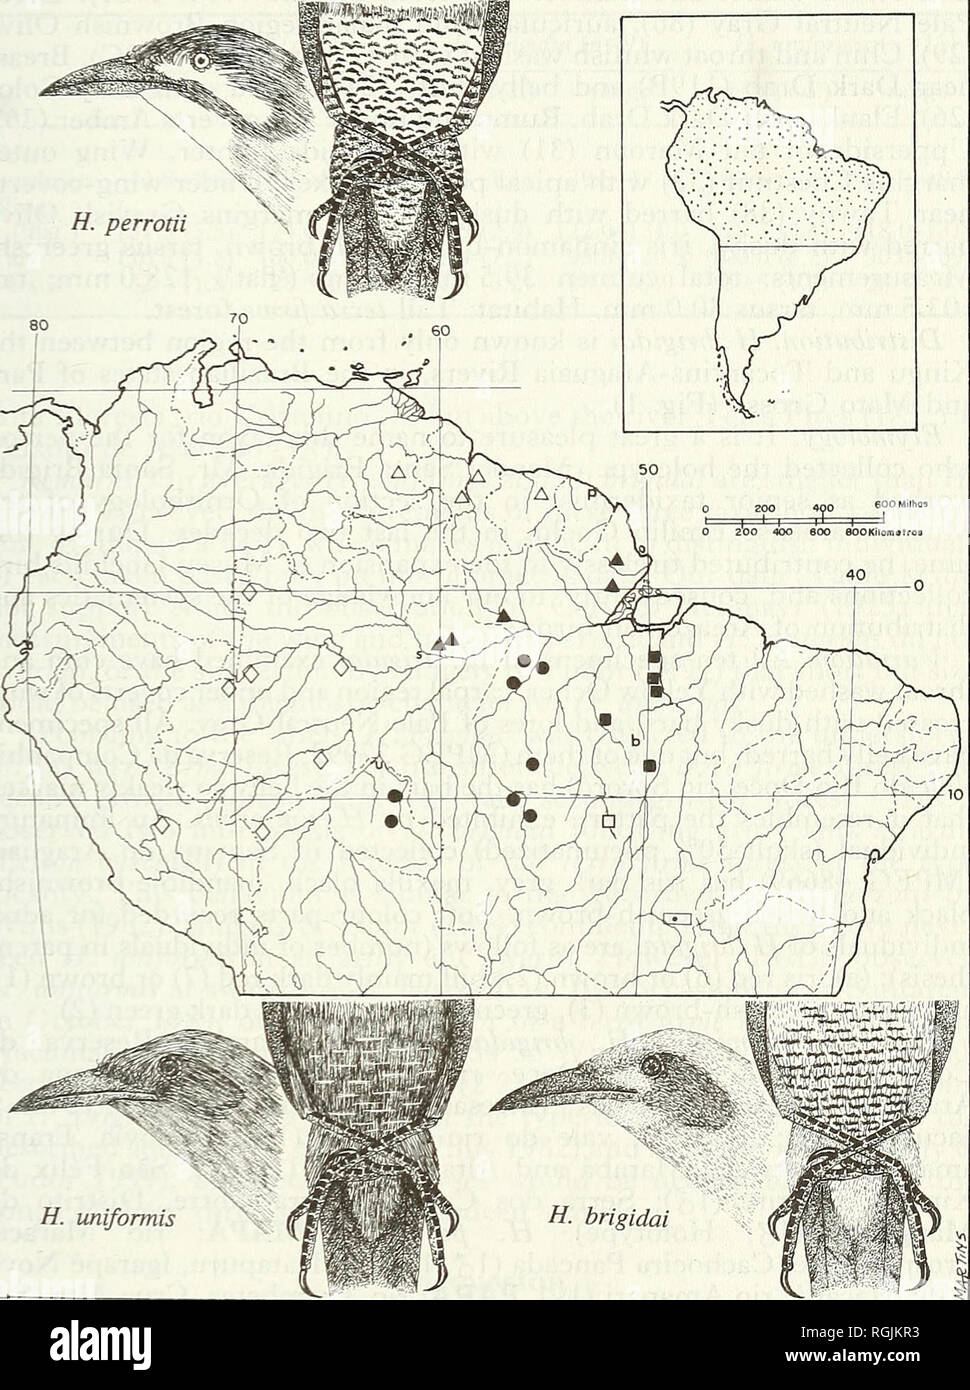 . Bulletin of the British Ornithologists' Club. Birds. jf. M. Cardoso da Silva et al. 201 Bull. B.O.C. 1995 115(4). H. uniformis Figure 1. Distribution of the four species of Hylexetastes in South America, with sketches of H. perrotii, H. brigidai and H. uniformis. Triangles, H. perrotii; squares, H. brigidai; circles, H. uniformis; rhombuses, H. stresemanni. Closed symbols indicate localities of specimens examined, open symbols records from the literature. Type localities are indicated as follows: p, H. perrotii; b, H. brigidai; u, H. uniformis; s, H. stresemanni.. Please note that these imag Stock Photo